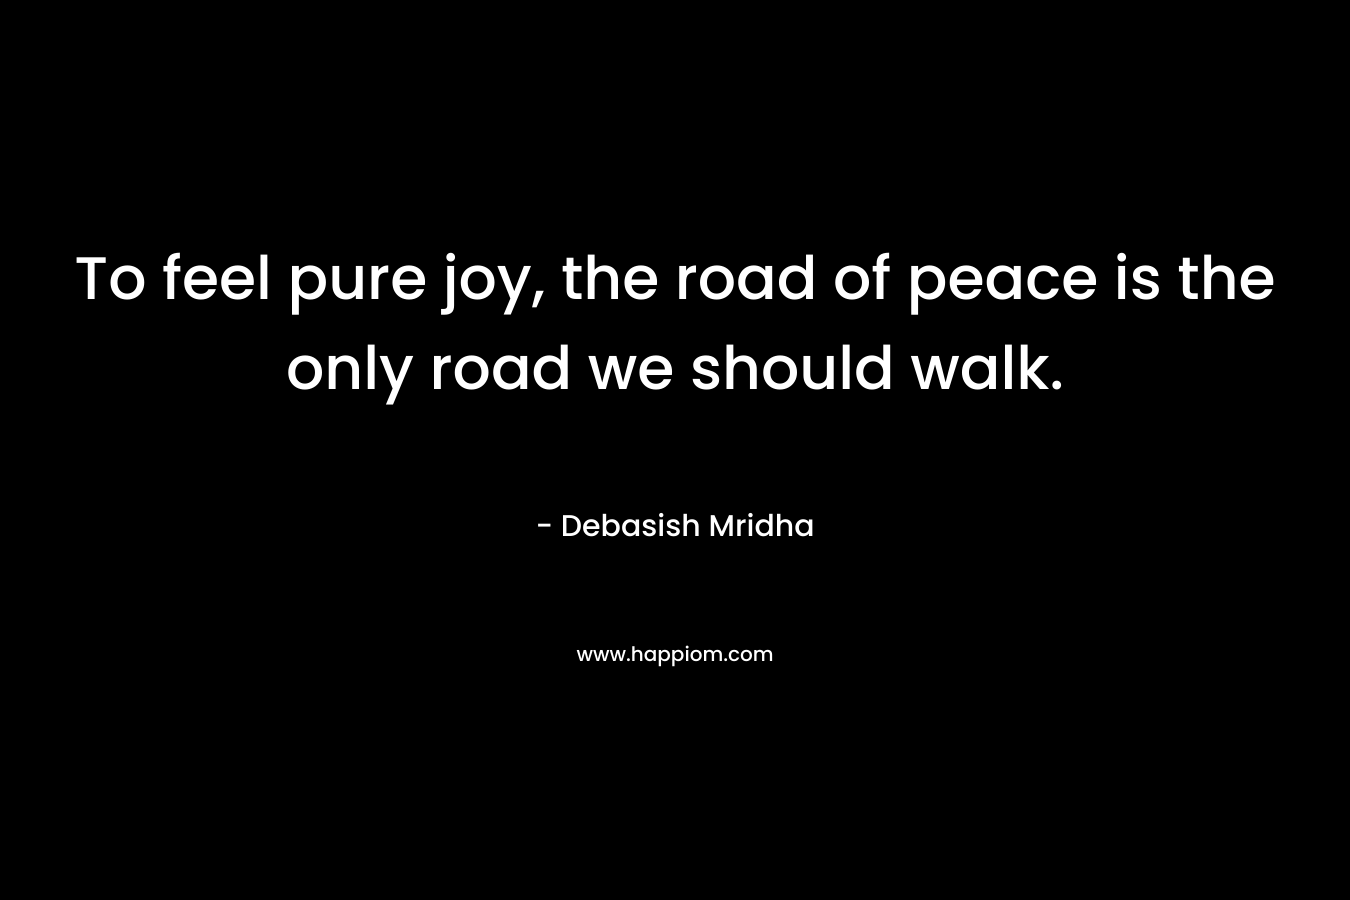 To feel pure joy, the road of peace is the only road we should walk.